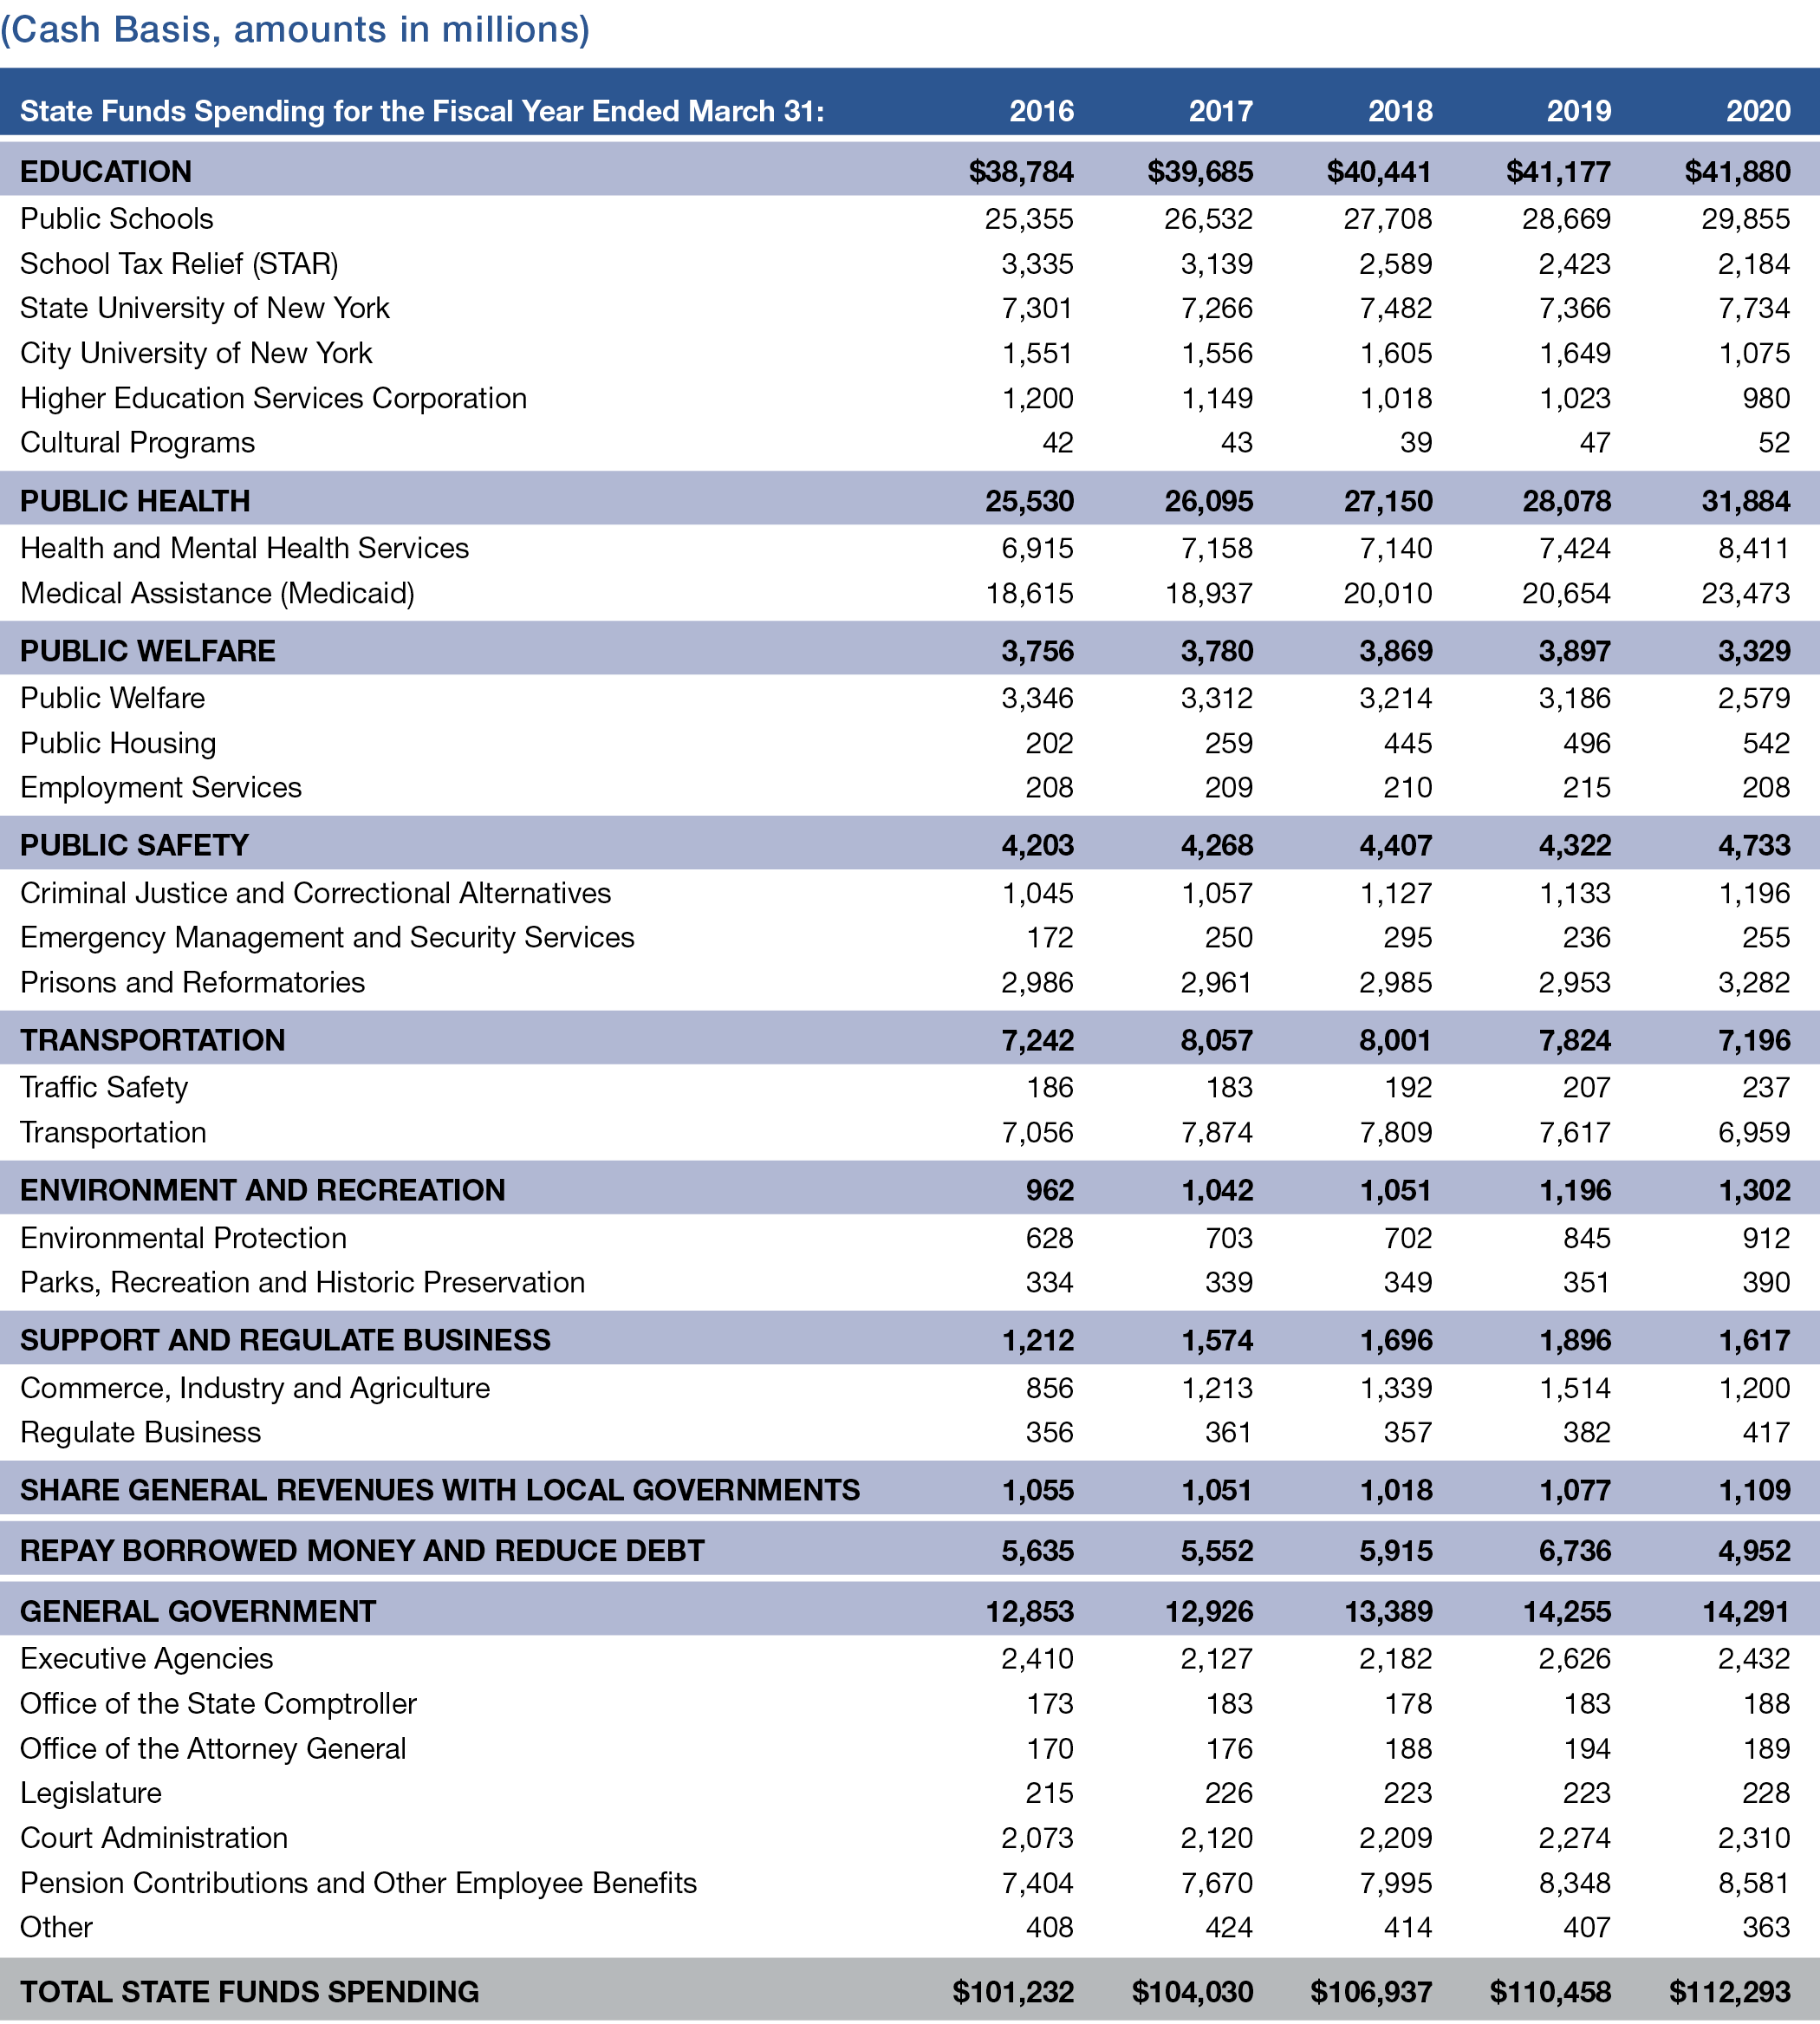 Appendix 1: State Funds Spending by Major Service Function